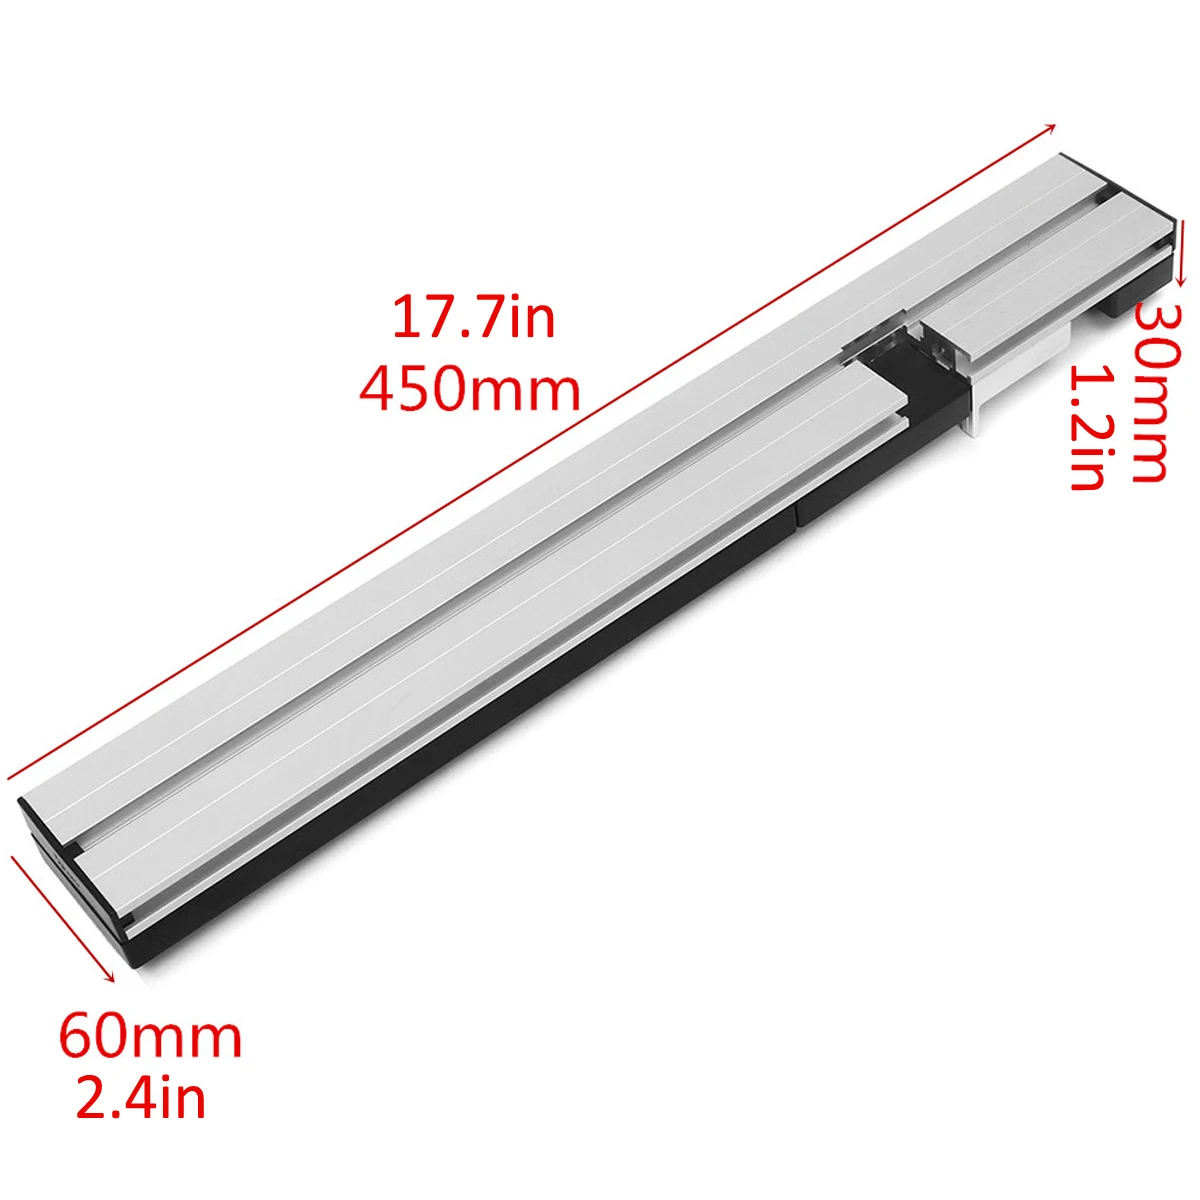 

Drillpro 450mm Aluminum Box Joint Jig Table Saw/Router Miter Gauge Sawing Assembly Ruler Kit For Miter Gauge Woodworking Tools